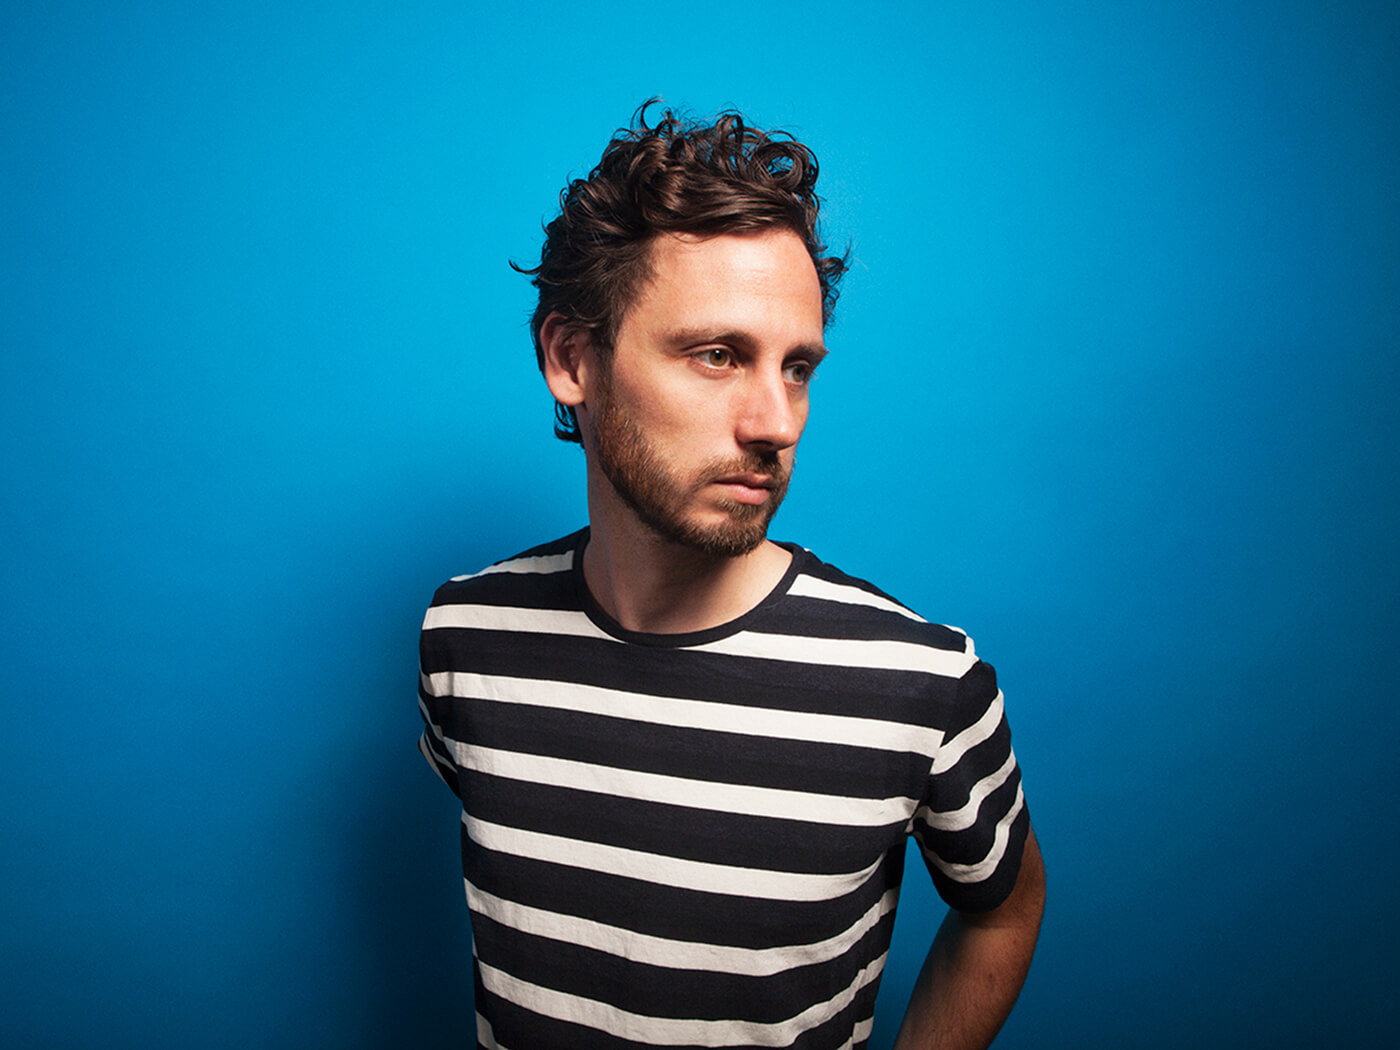 Mason photographed in a black and white striped T-shirt against a blue background, photo by Mason